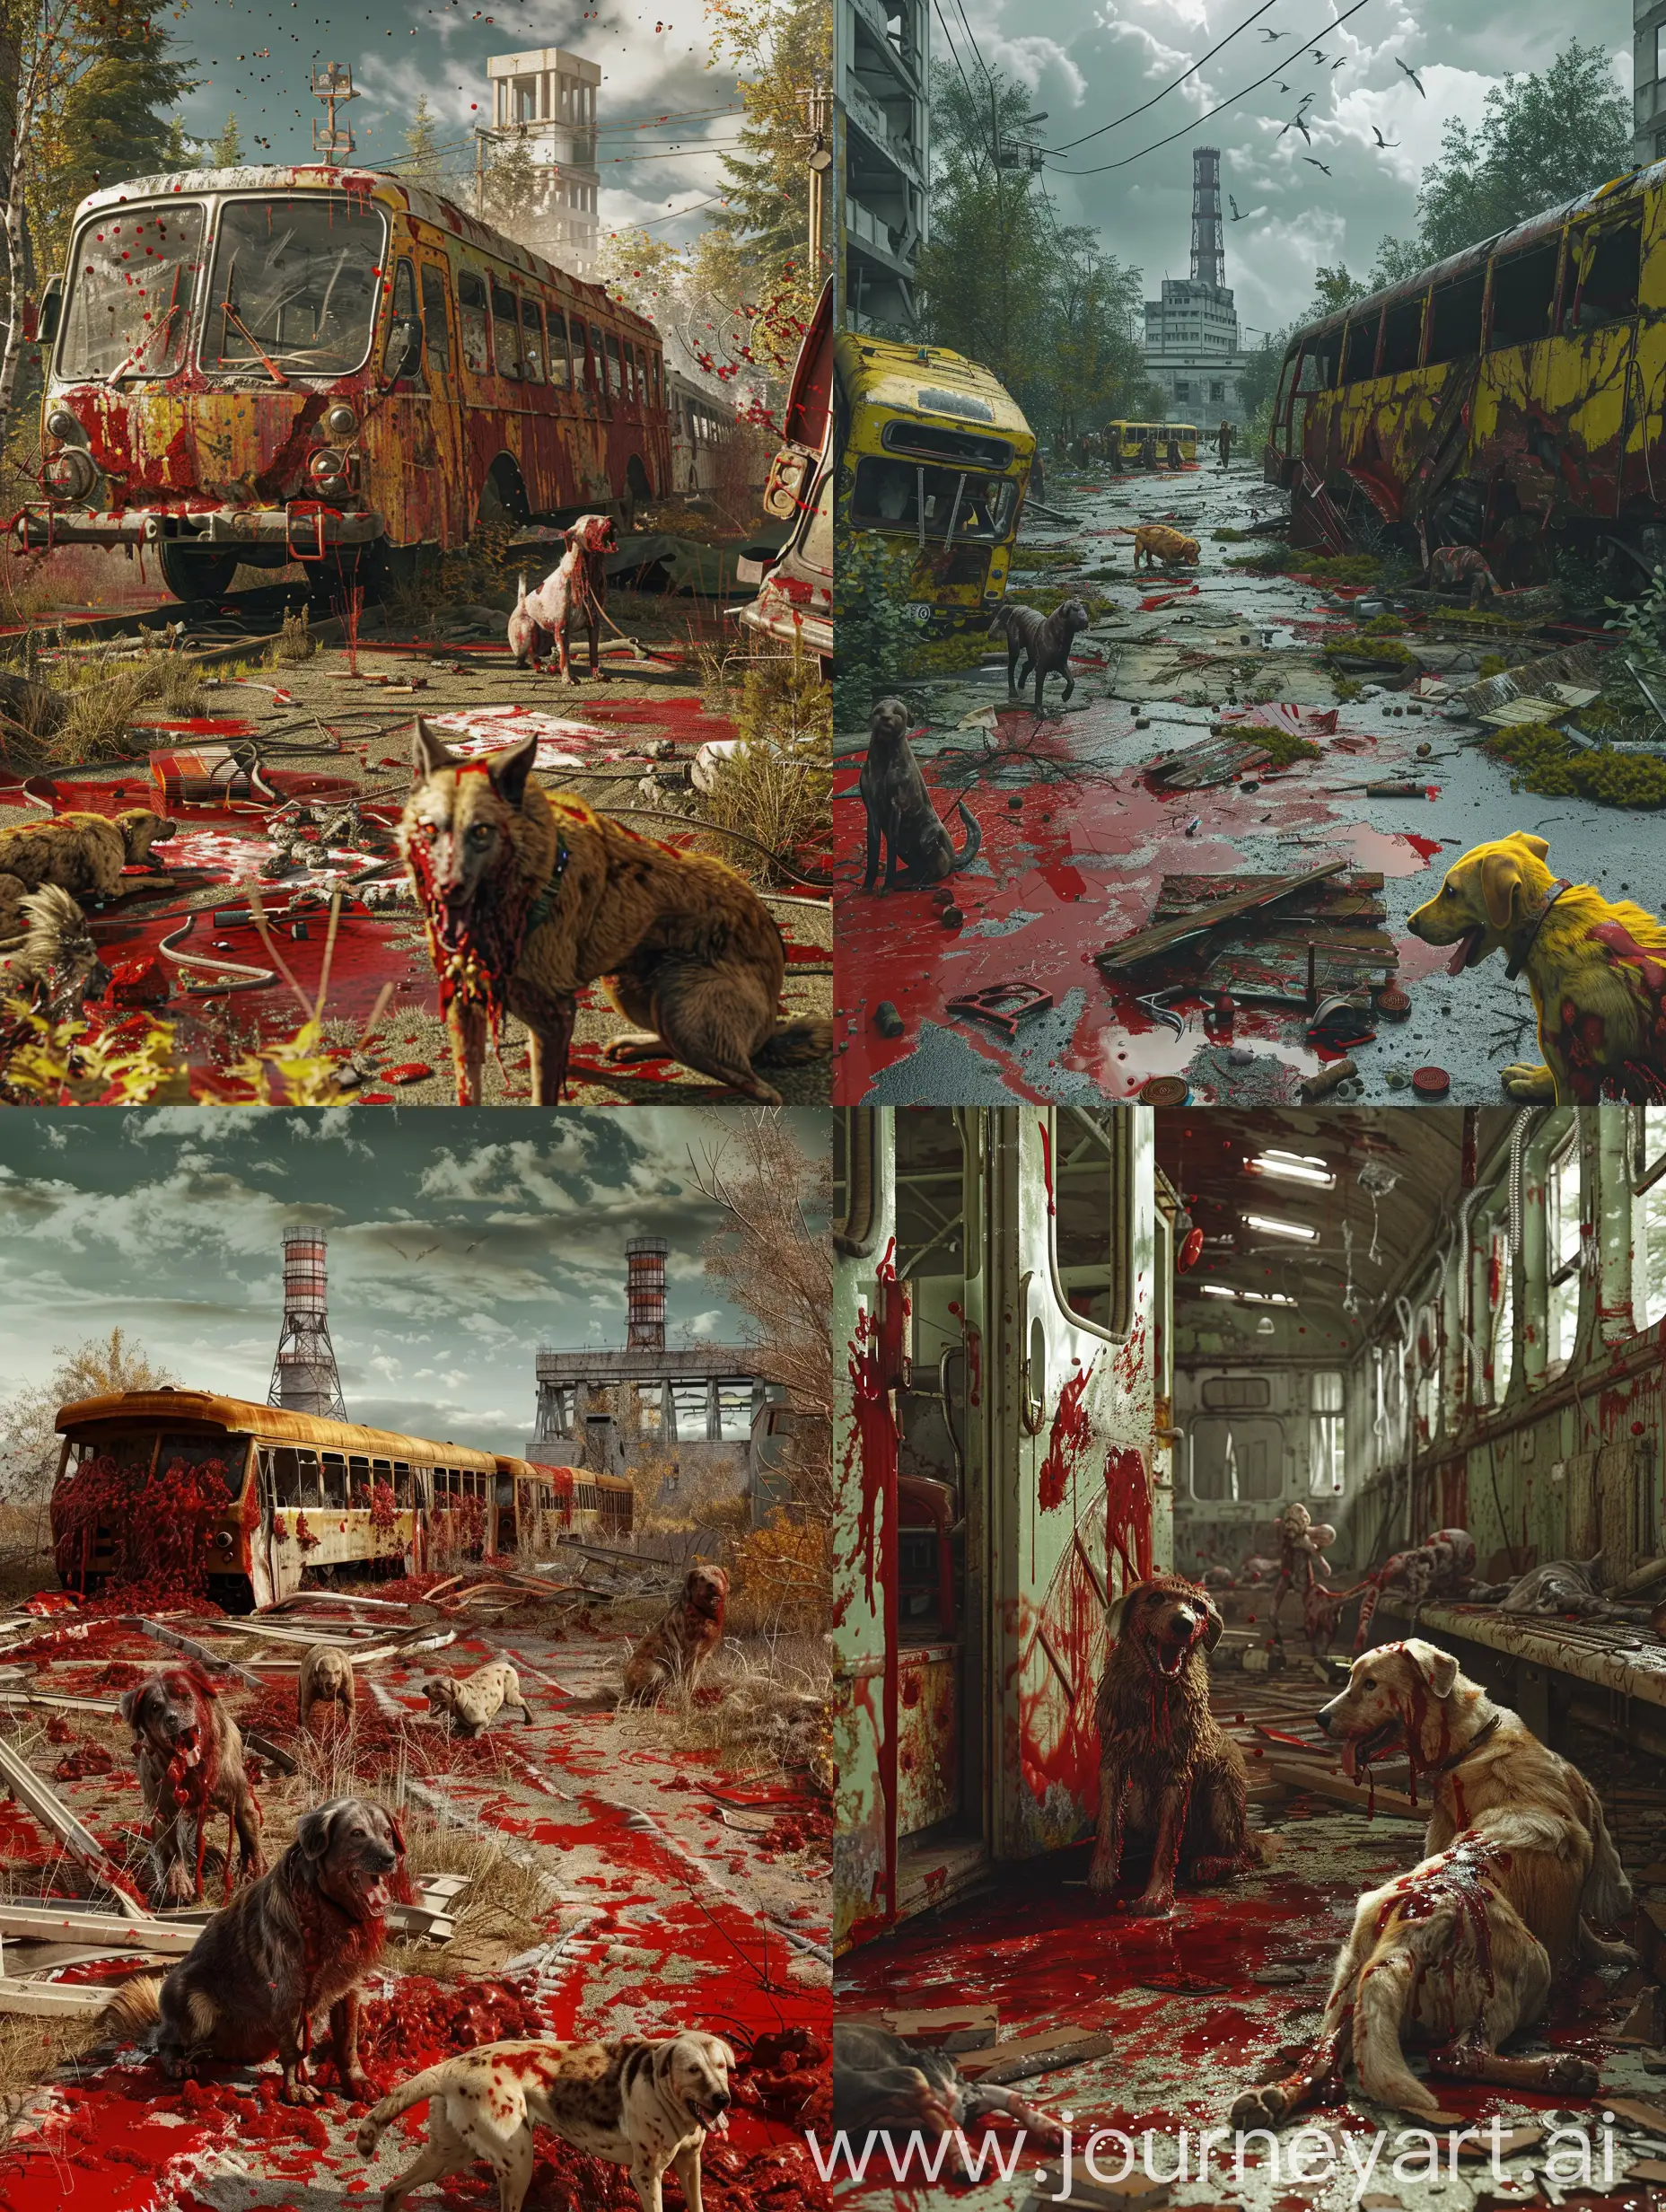 stalker, chernobyl, blood everywhere, zombies, dogs, destroyed transport, scary, Chernobyl nuclear power plant